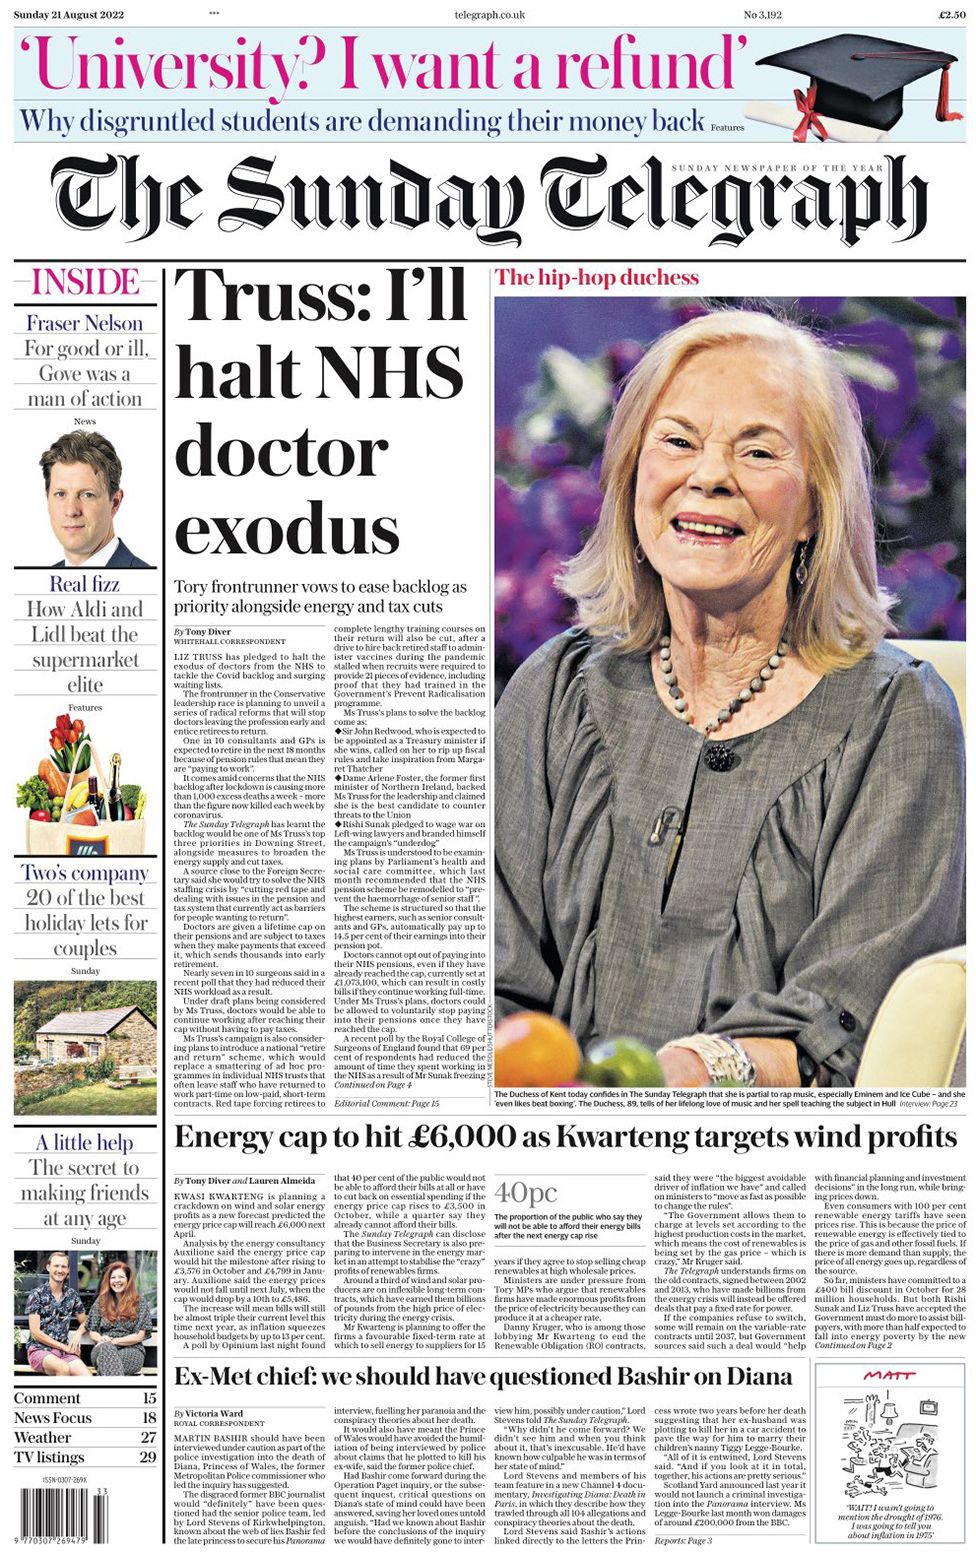 The Sunday Telegraph front page 21 August 2022